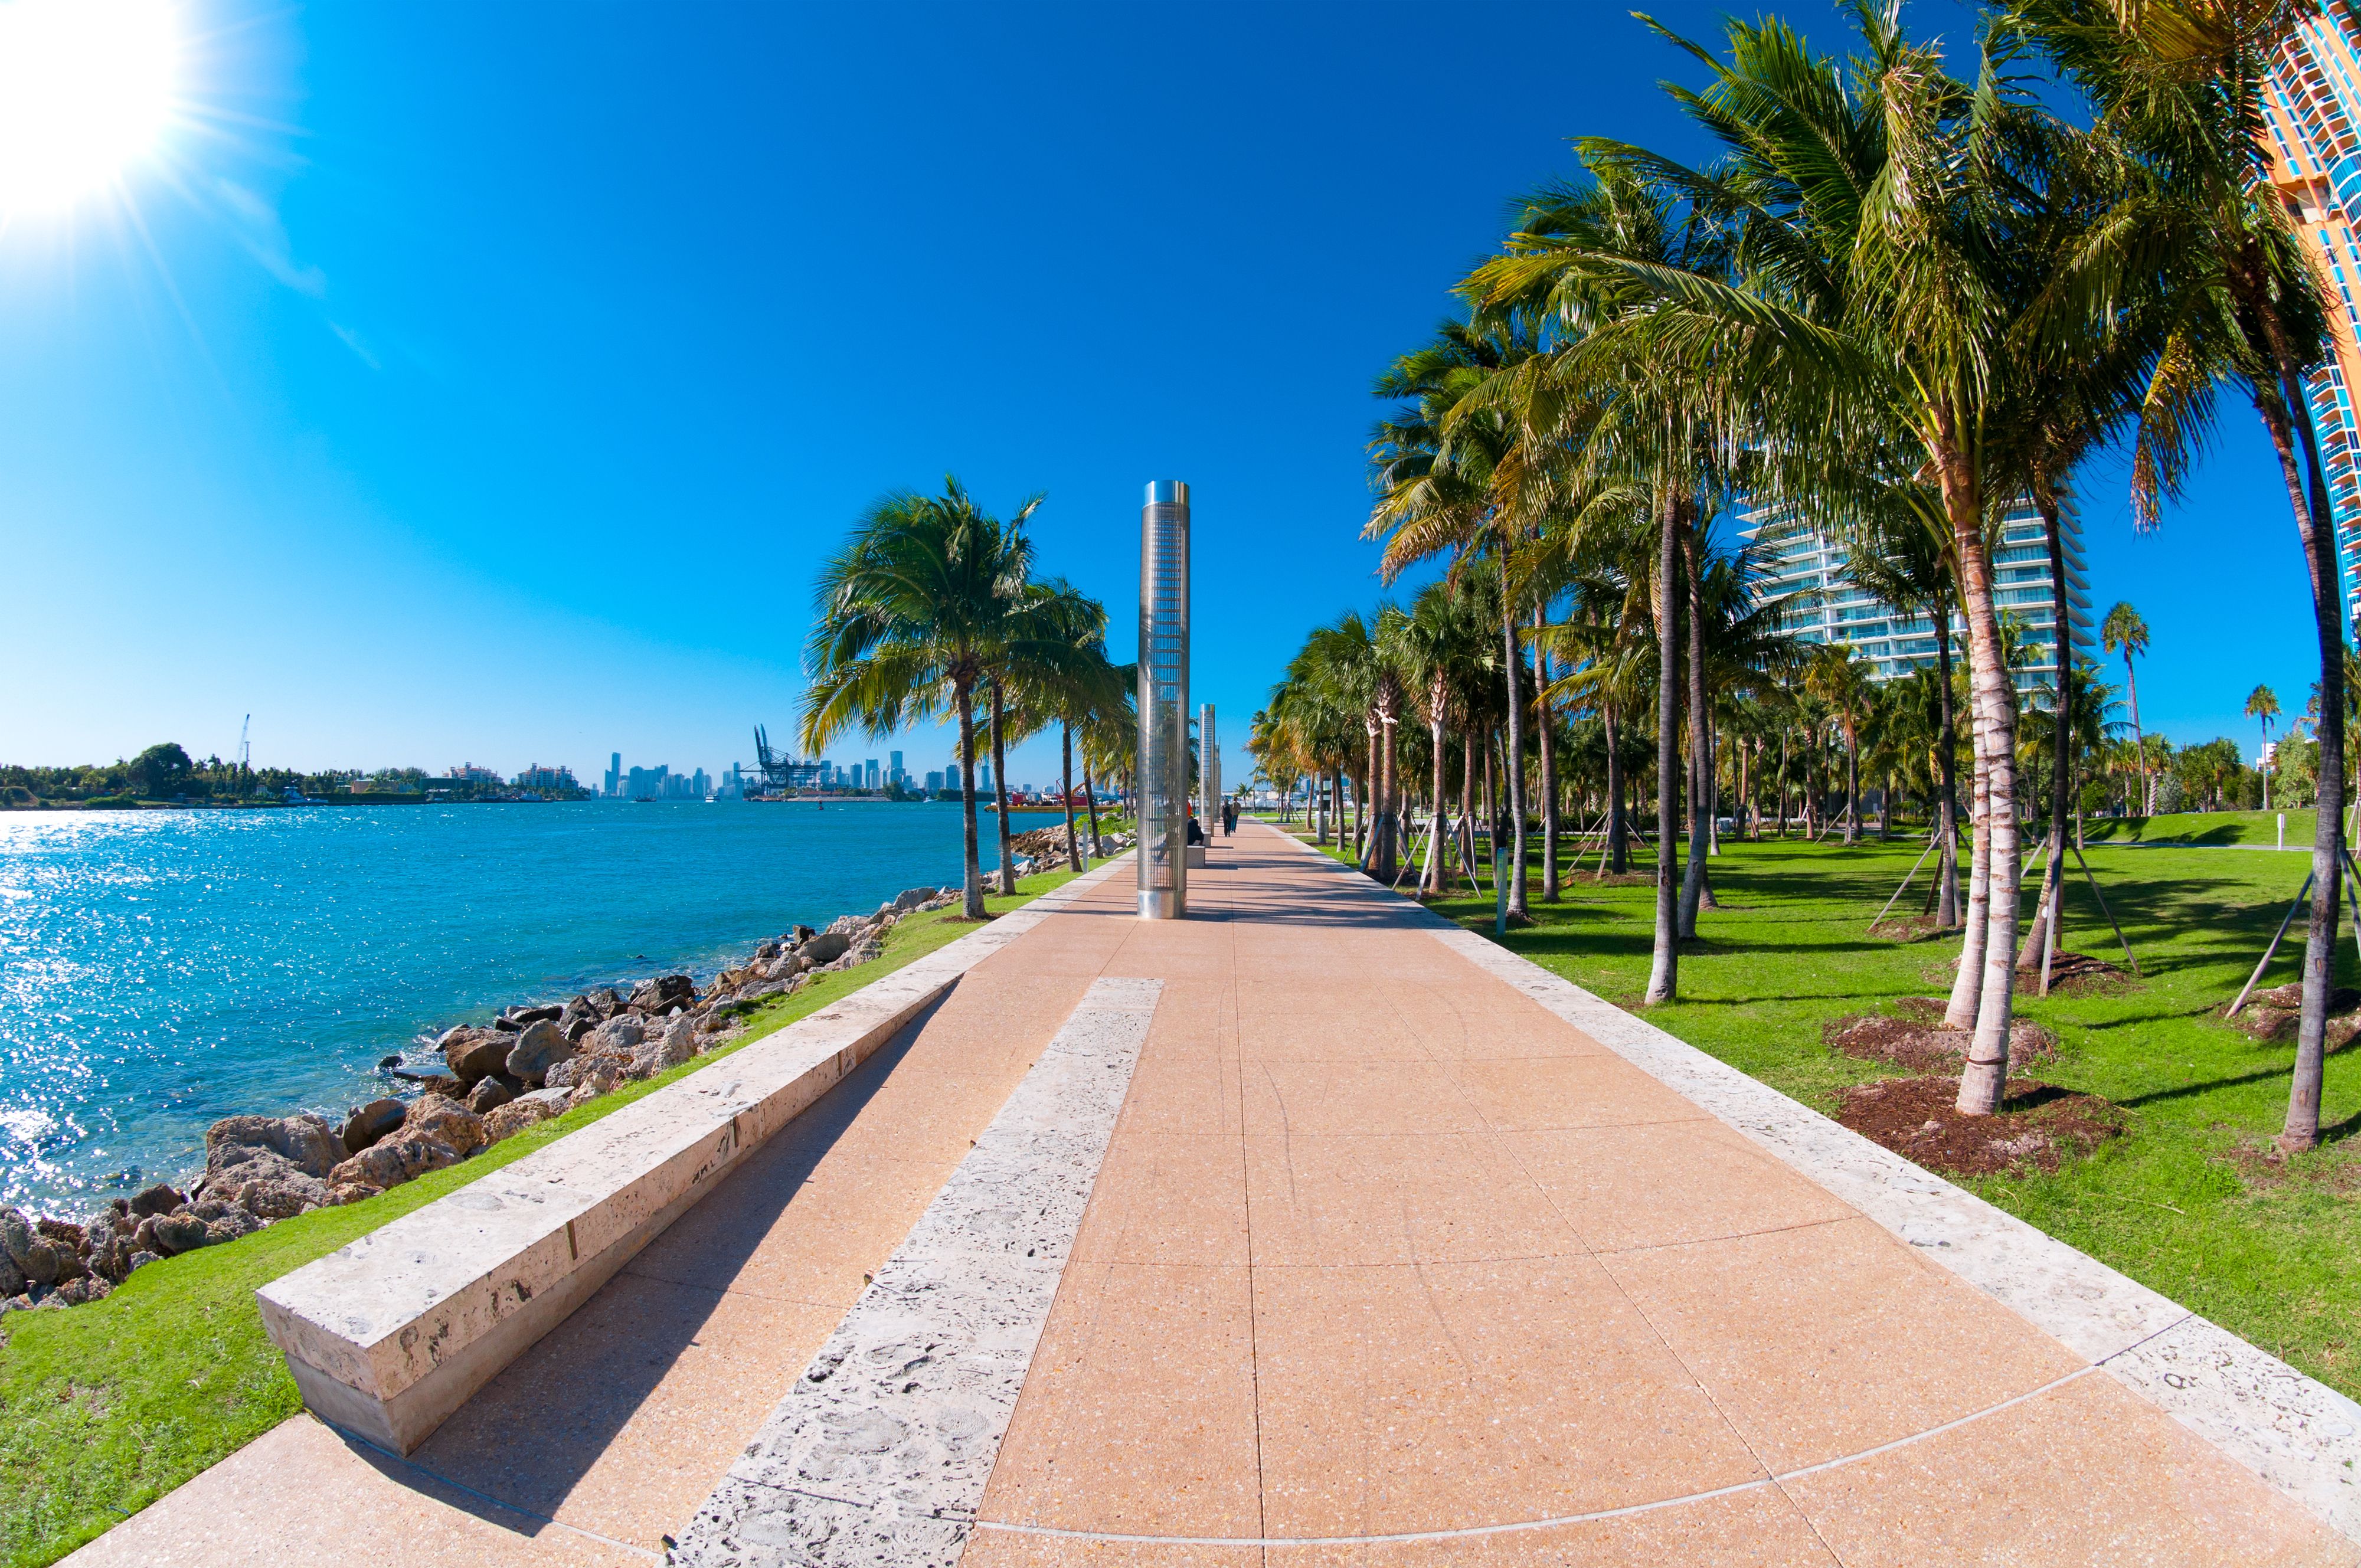 Walkway in South Pointe in Miami Beach, Florida